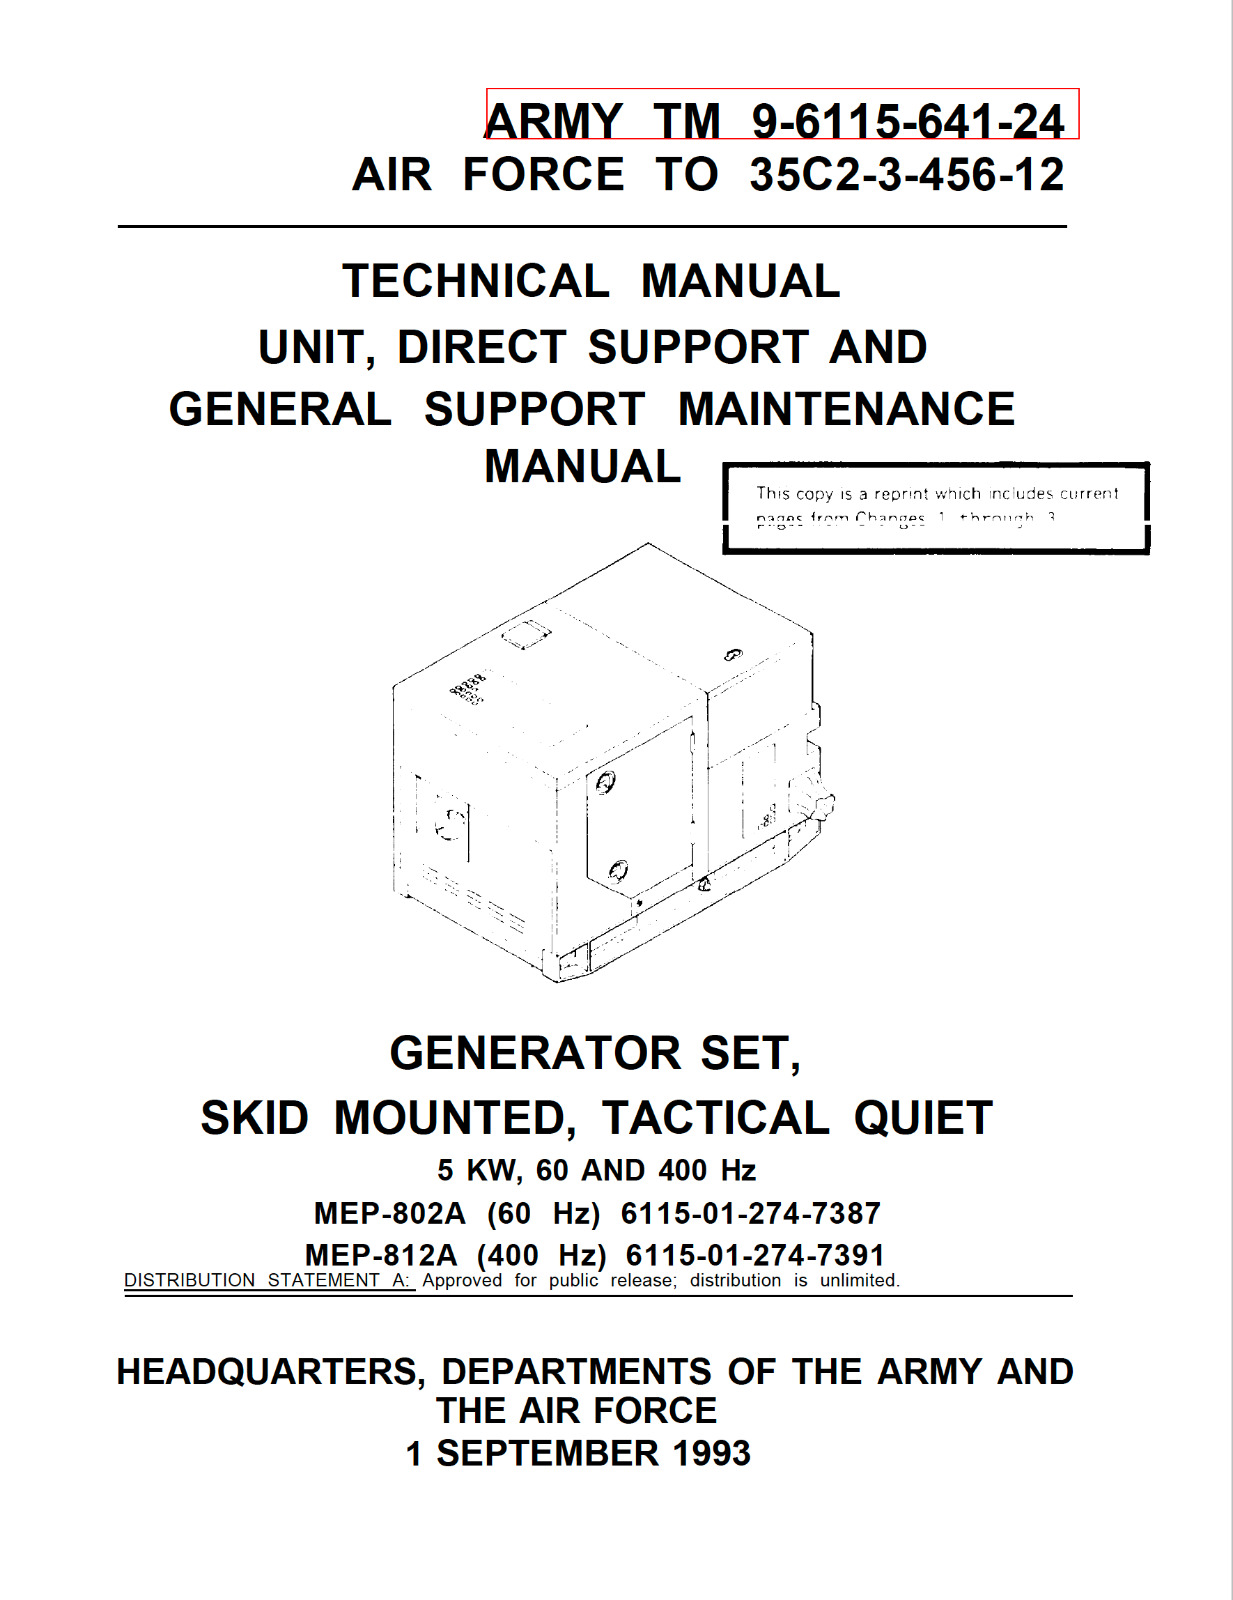 297 page 5kW TACTICAL QUIET GENERATOR SET MEP-802A -12A Maintenance Manual on CD